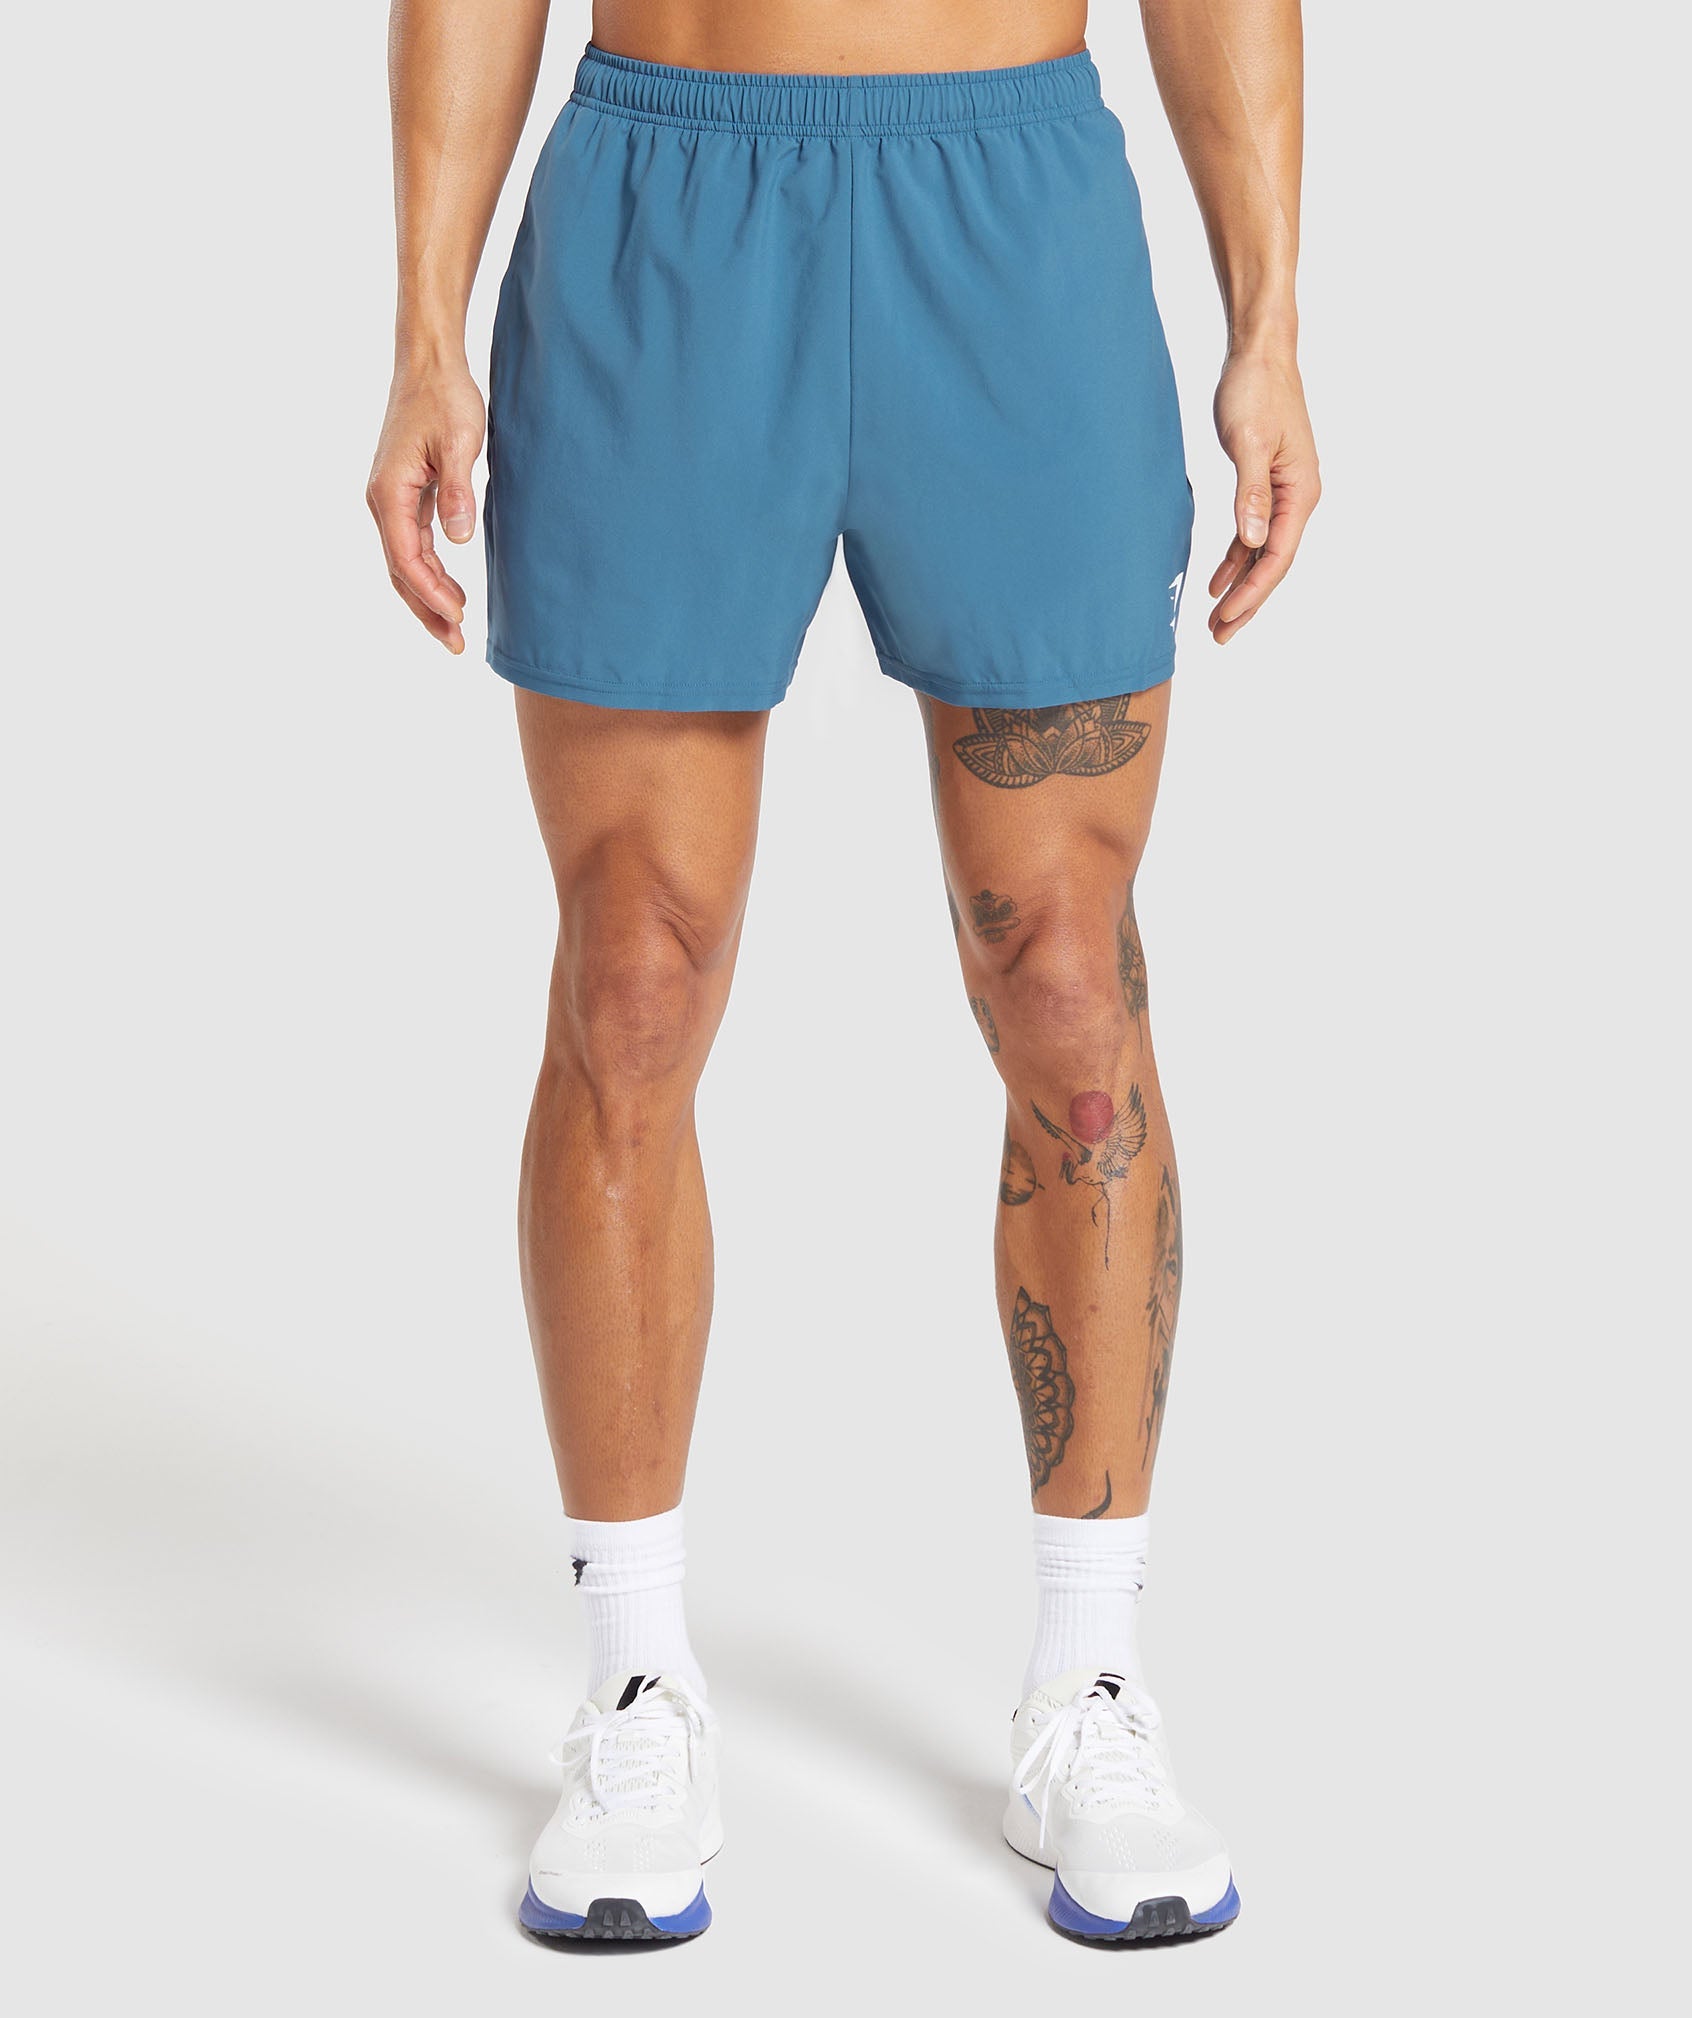 Arrival 5" Shorts in Utility Blue